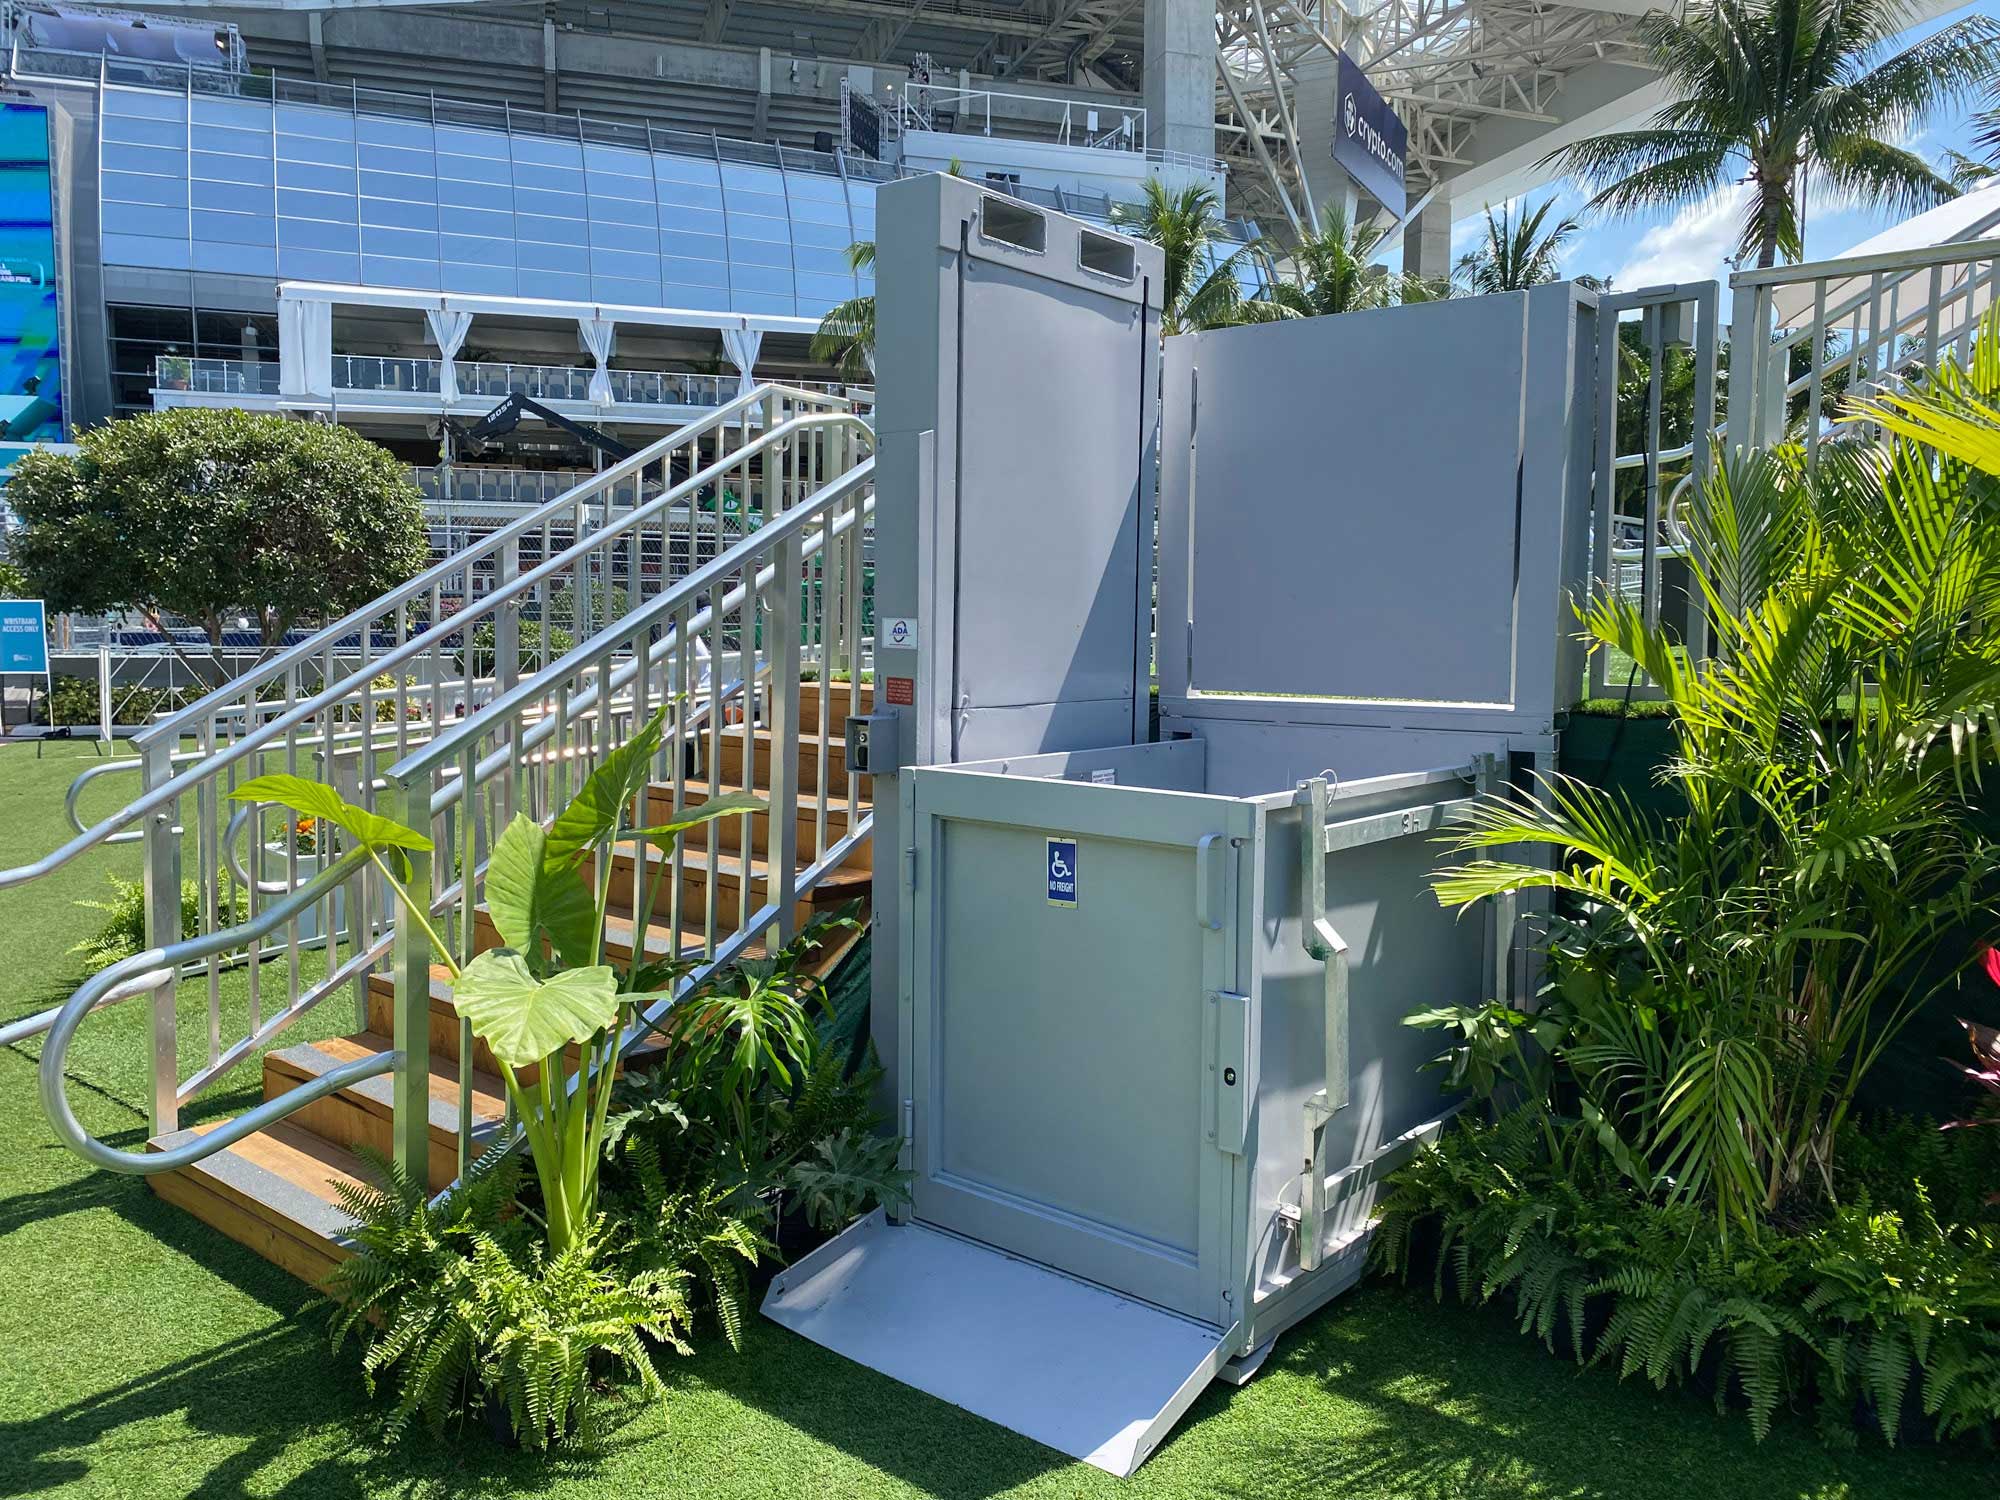 grey, 6' ADA wheelchair lift rental next to stairs to a hospitality center at the F1 Miami Grand Prix